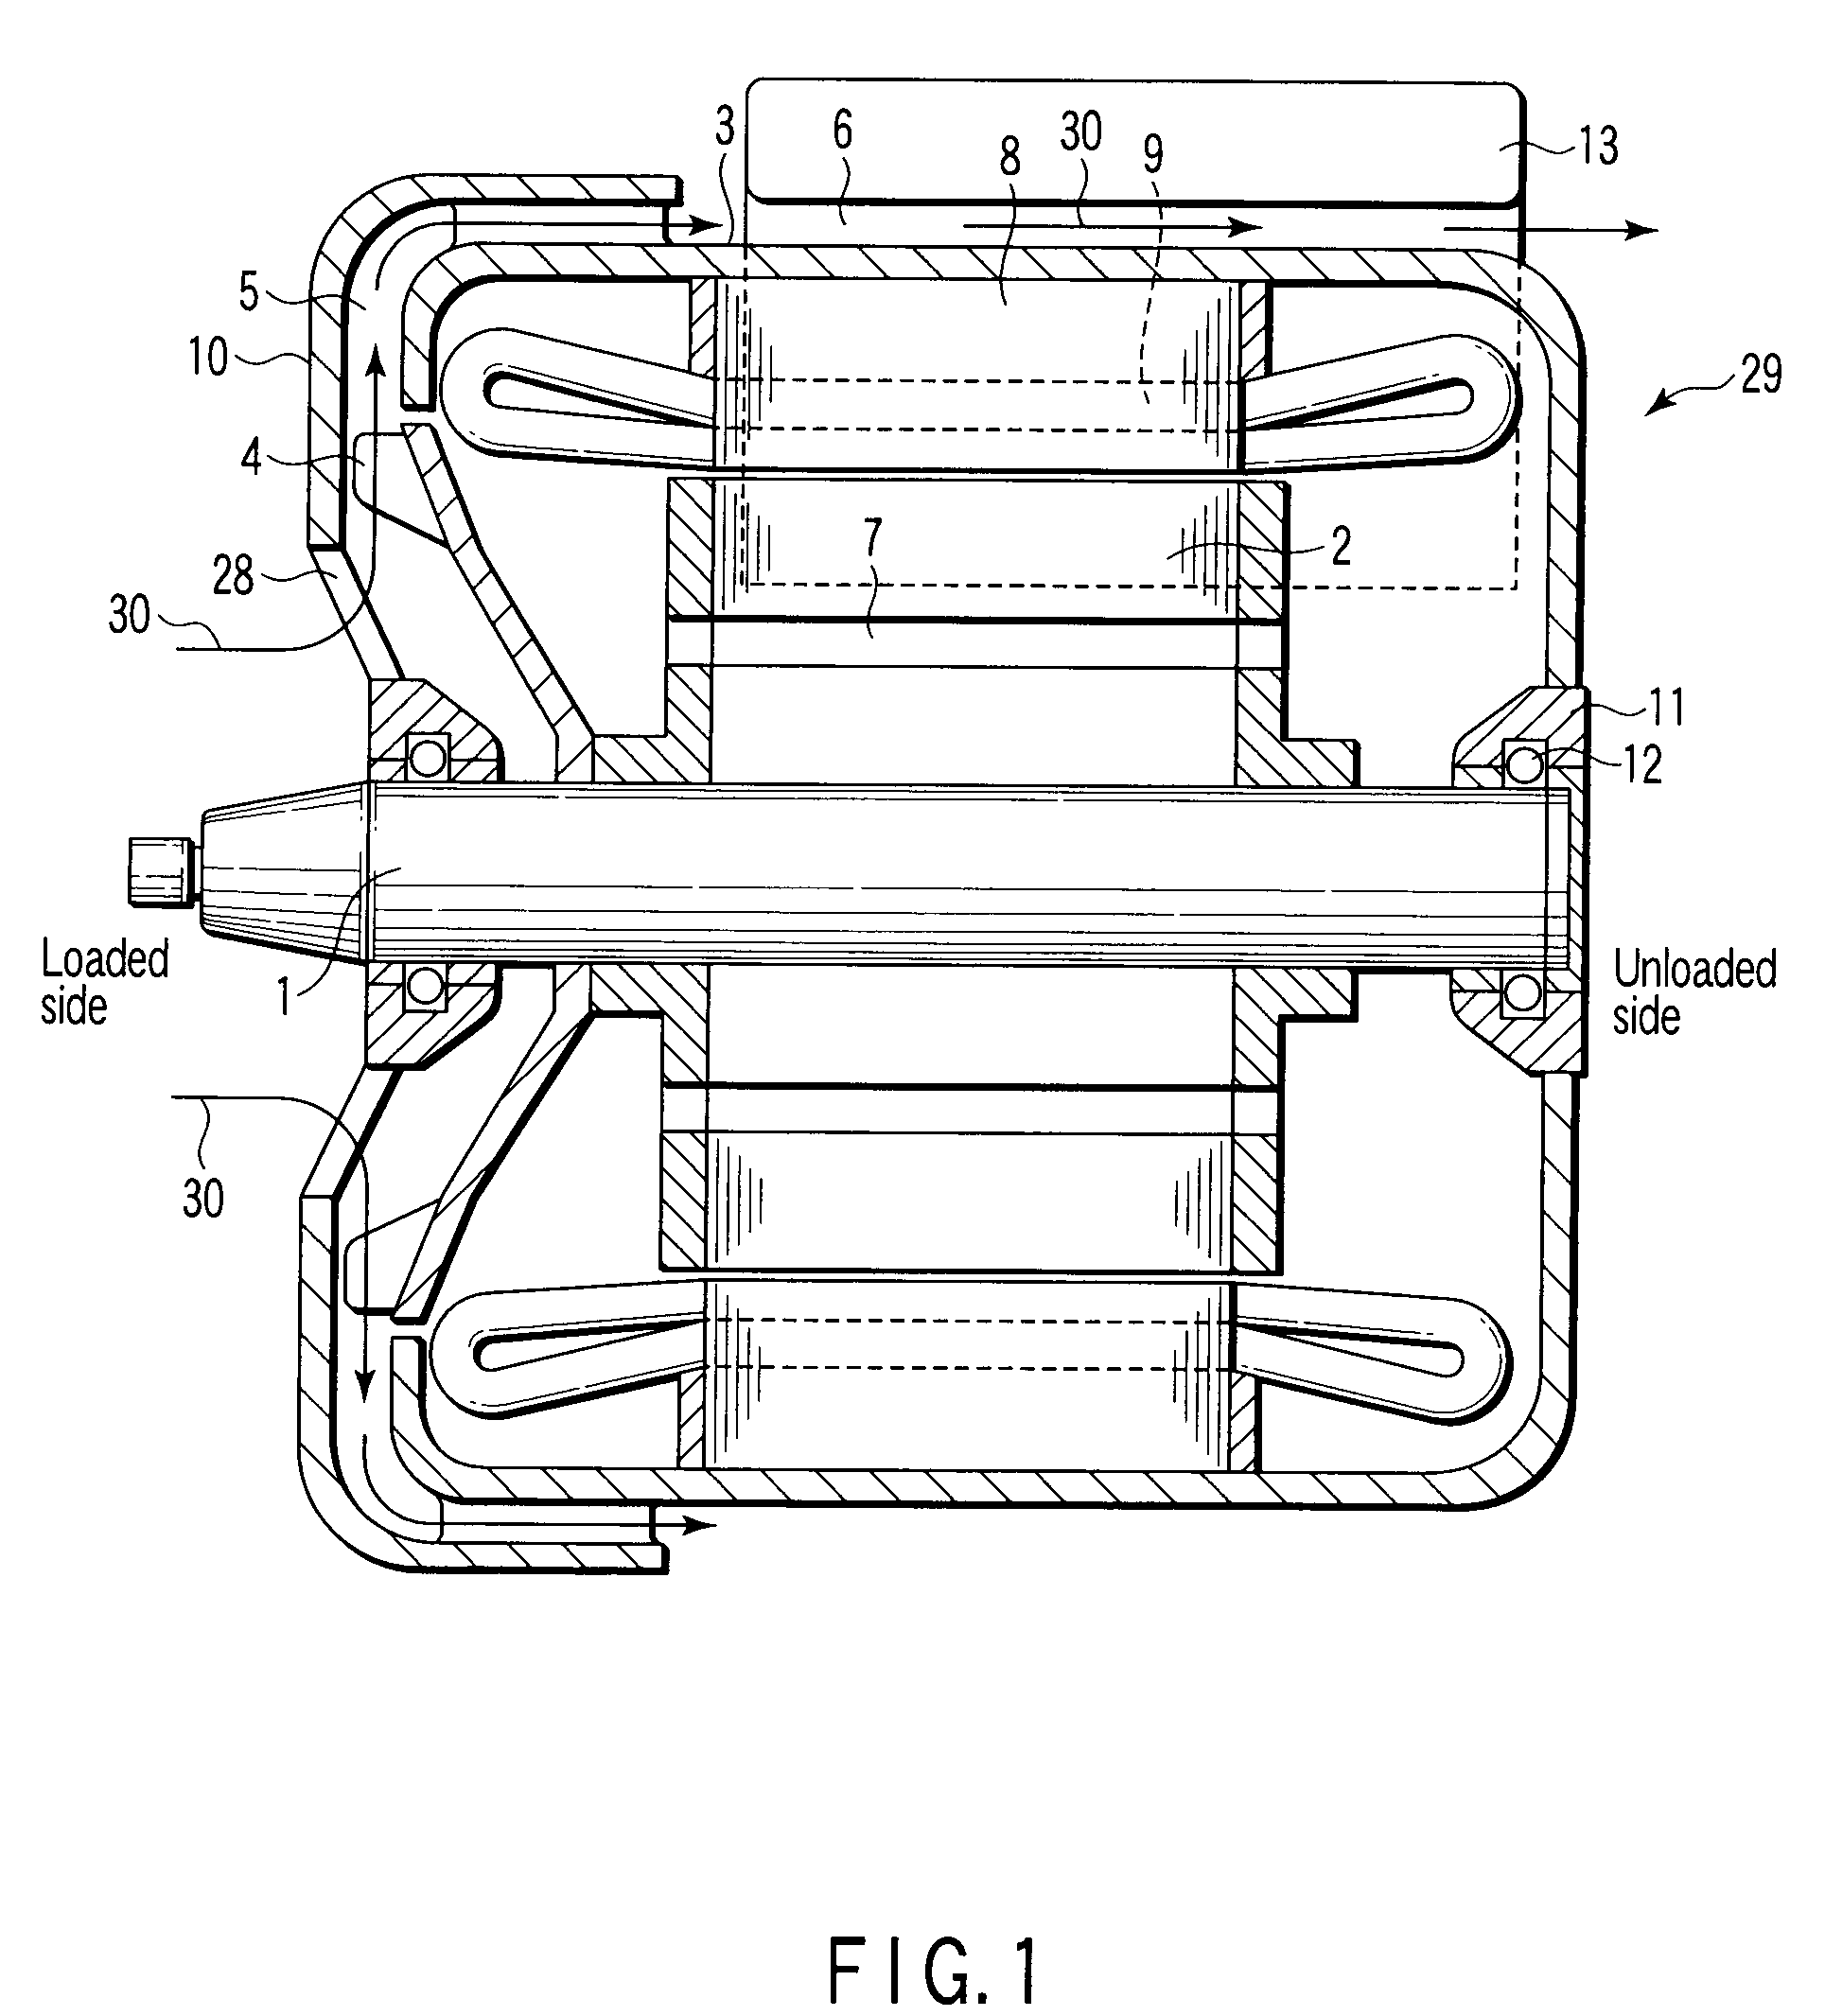 Apparatus for controller-integrated motor